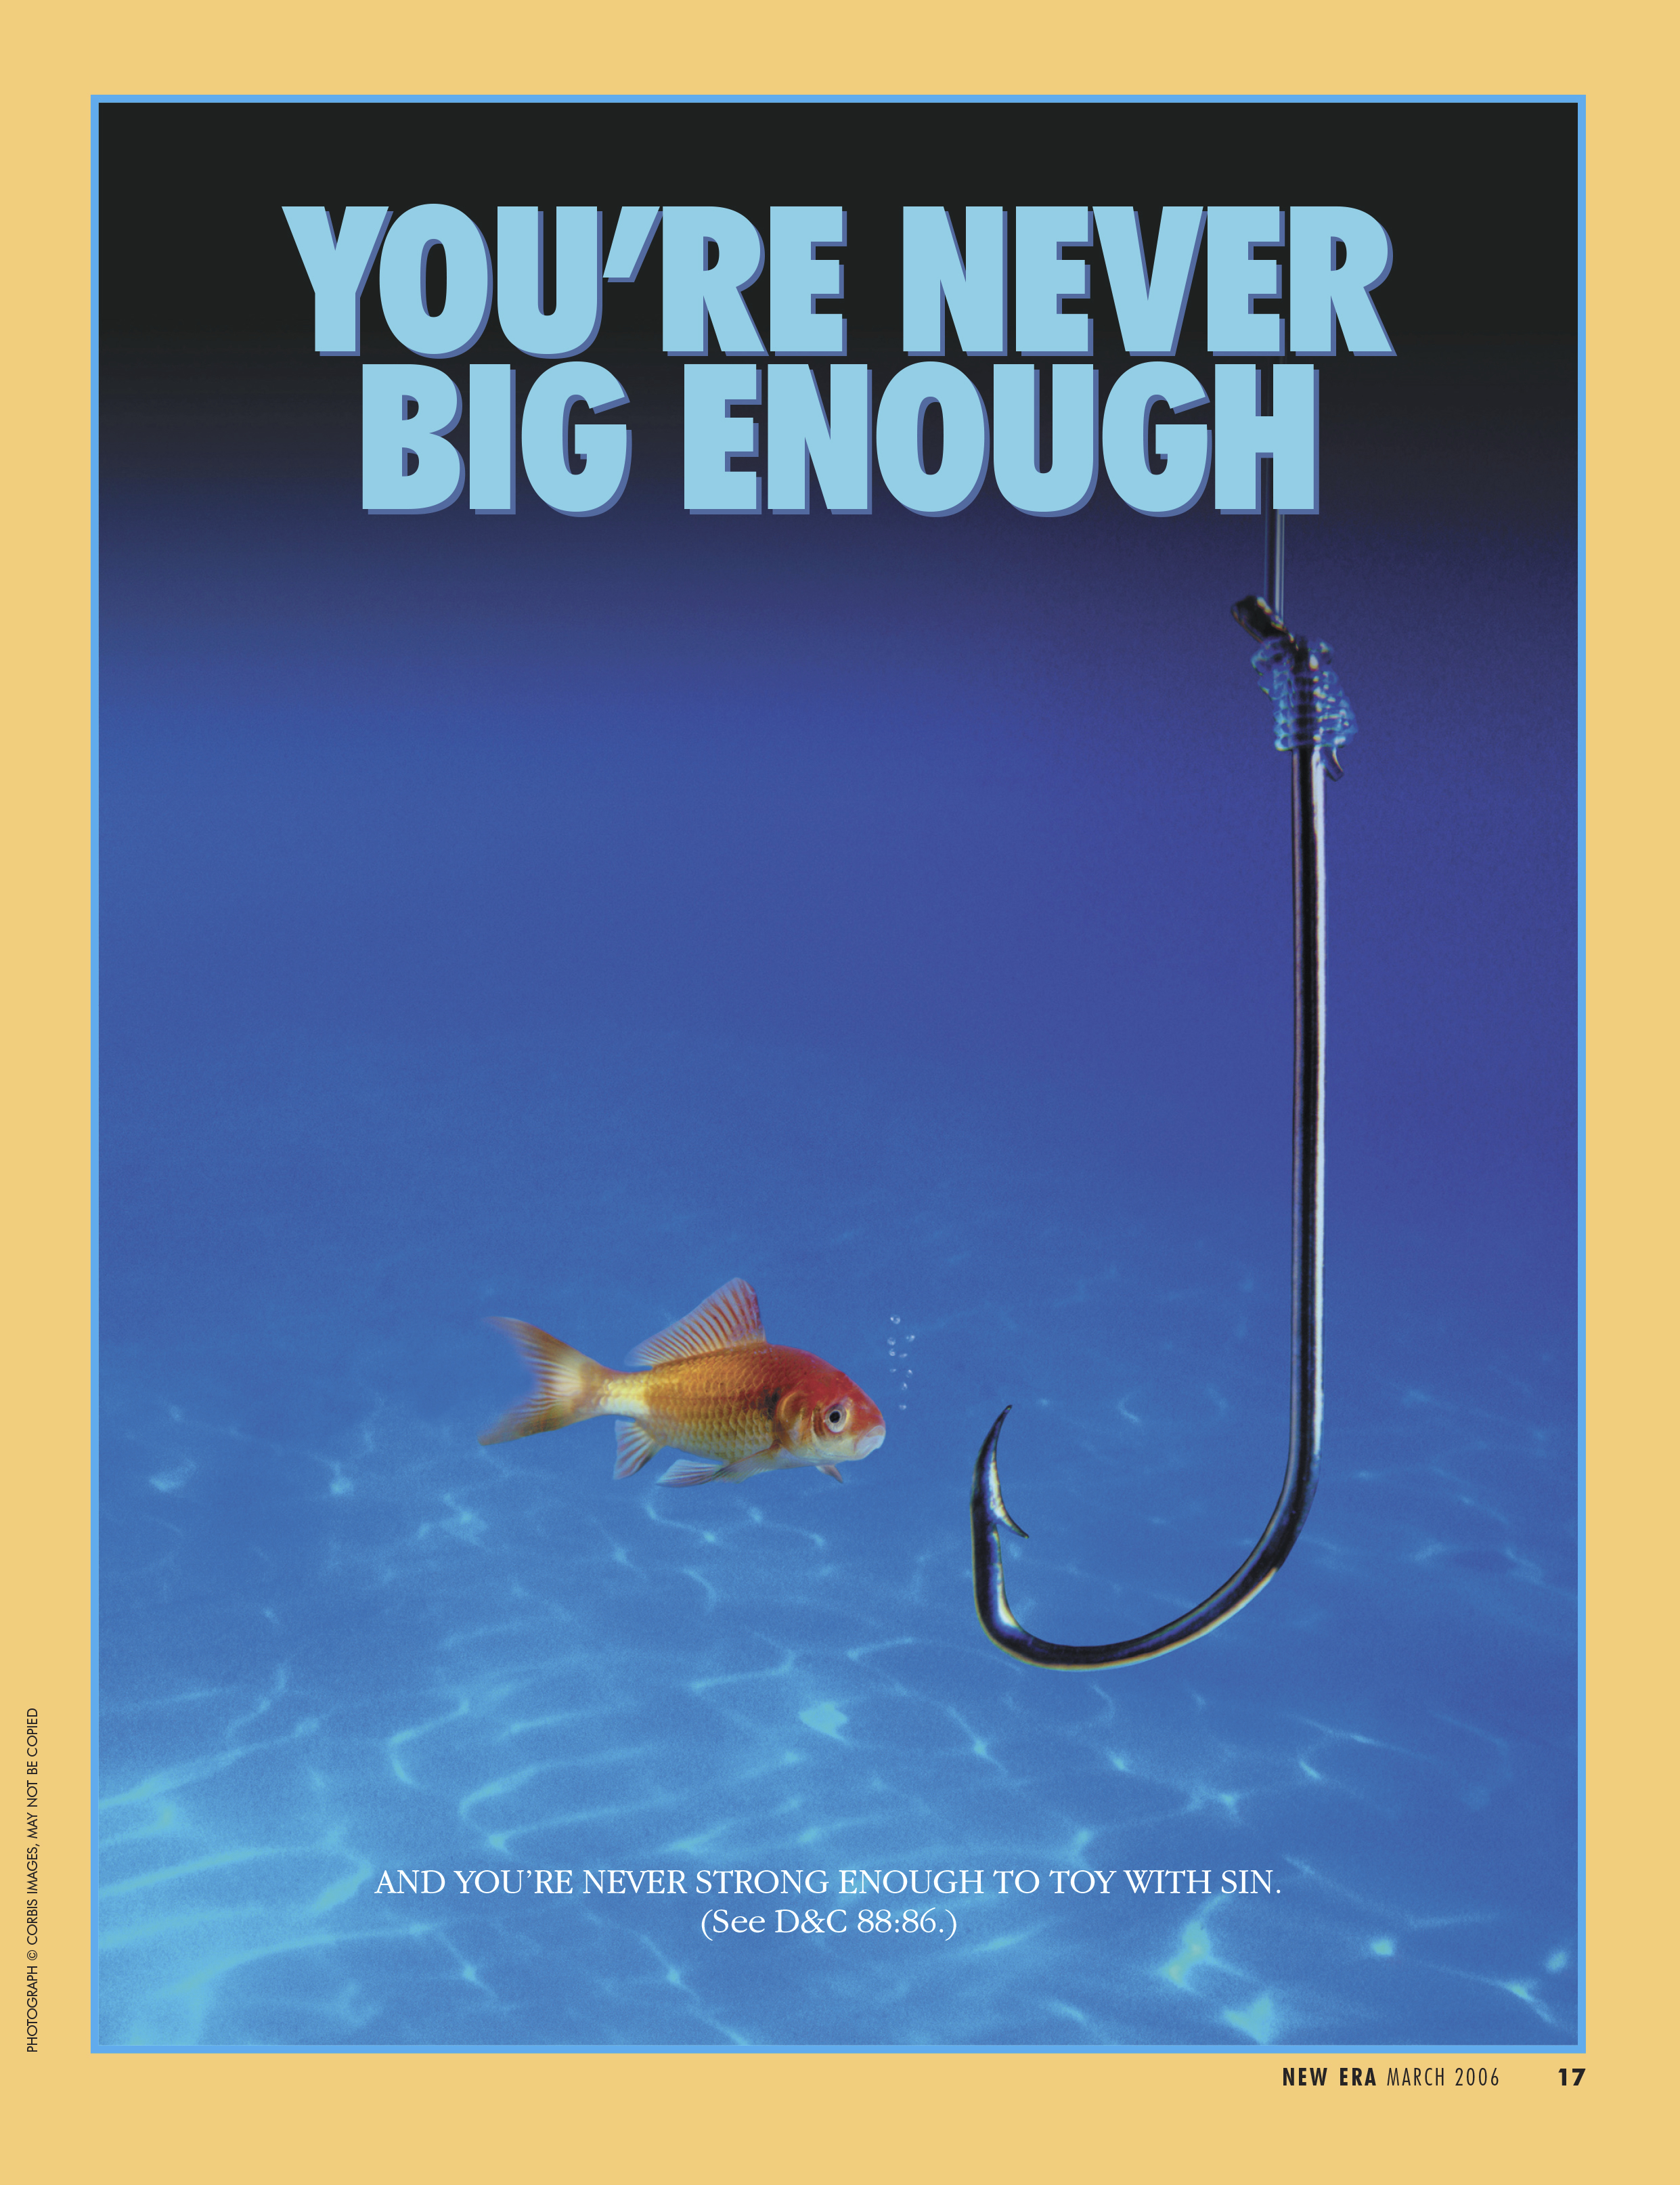 You’re Never Big Enough. And you’re never strong enough to toy with sin. (See D&C 88:86.) Mar. 2006 © undefined ipCode 1.